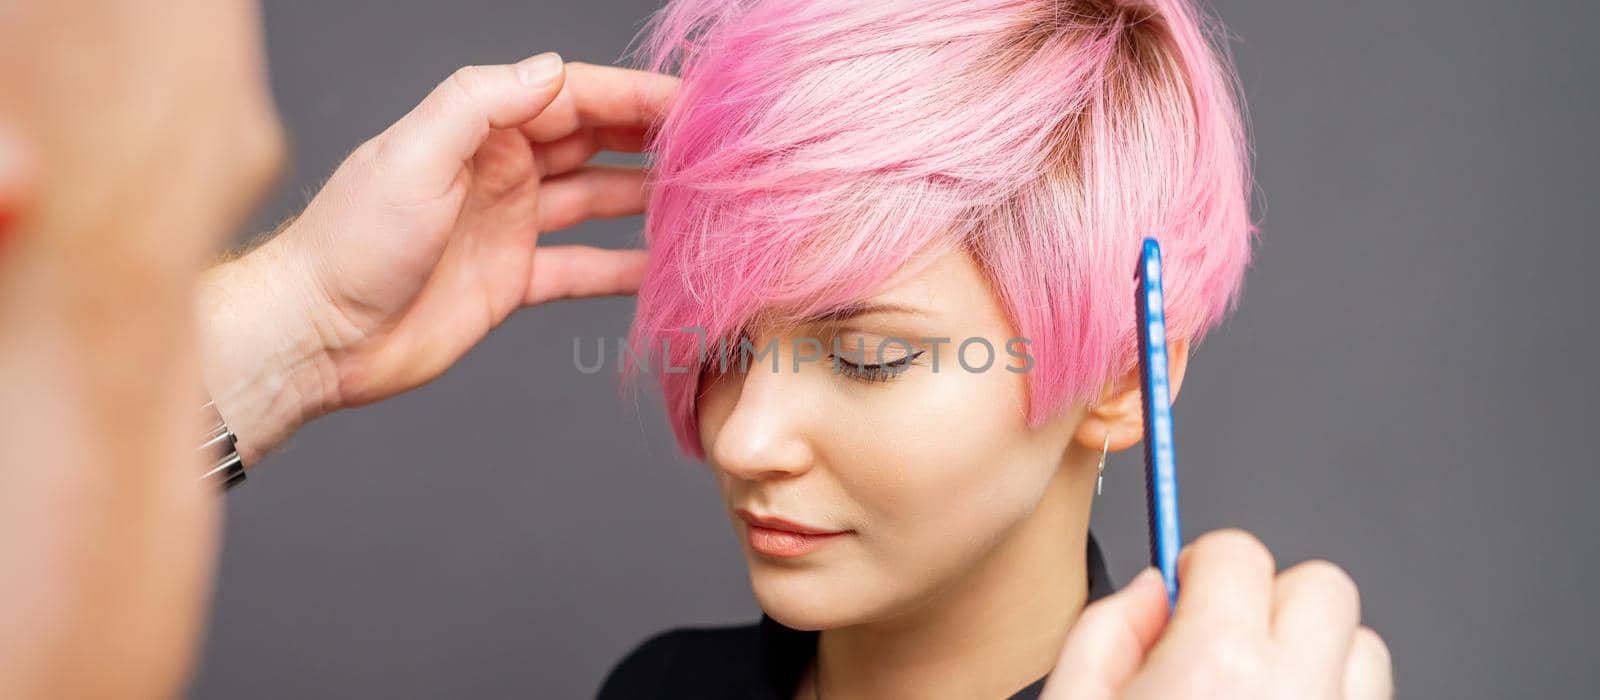 Hairdresser checking short pink hairstyle of young woman on gray background